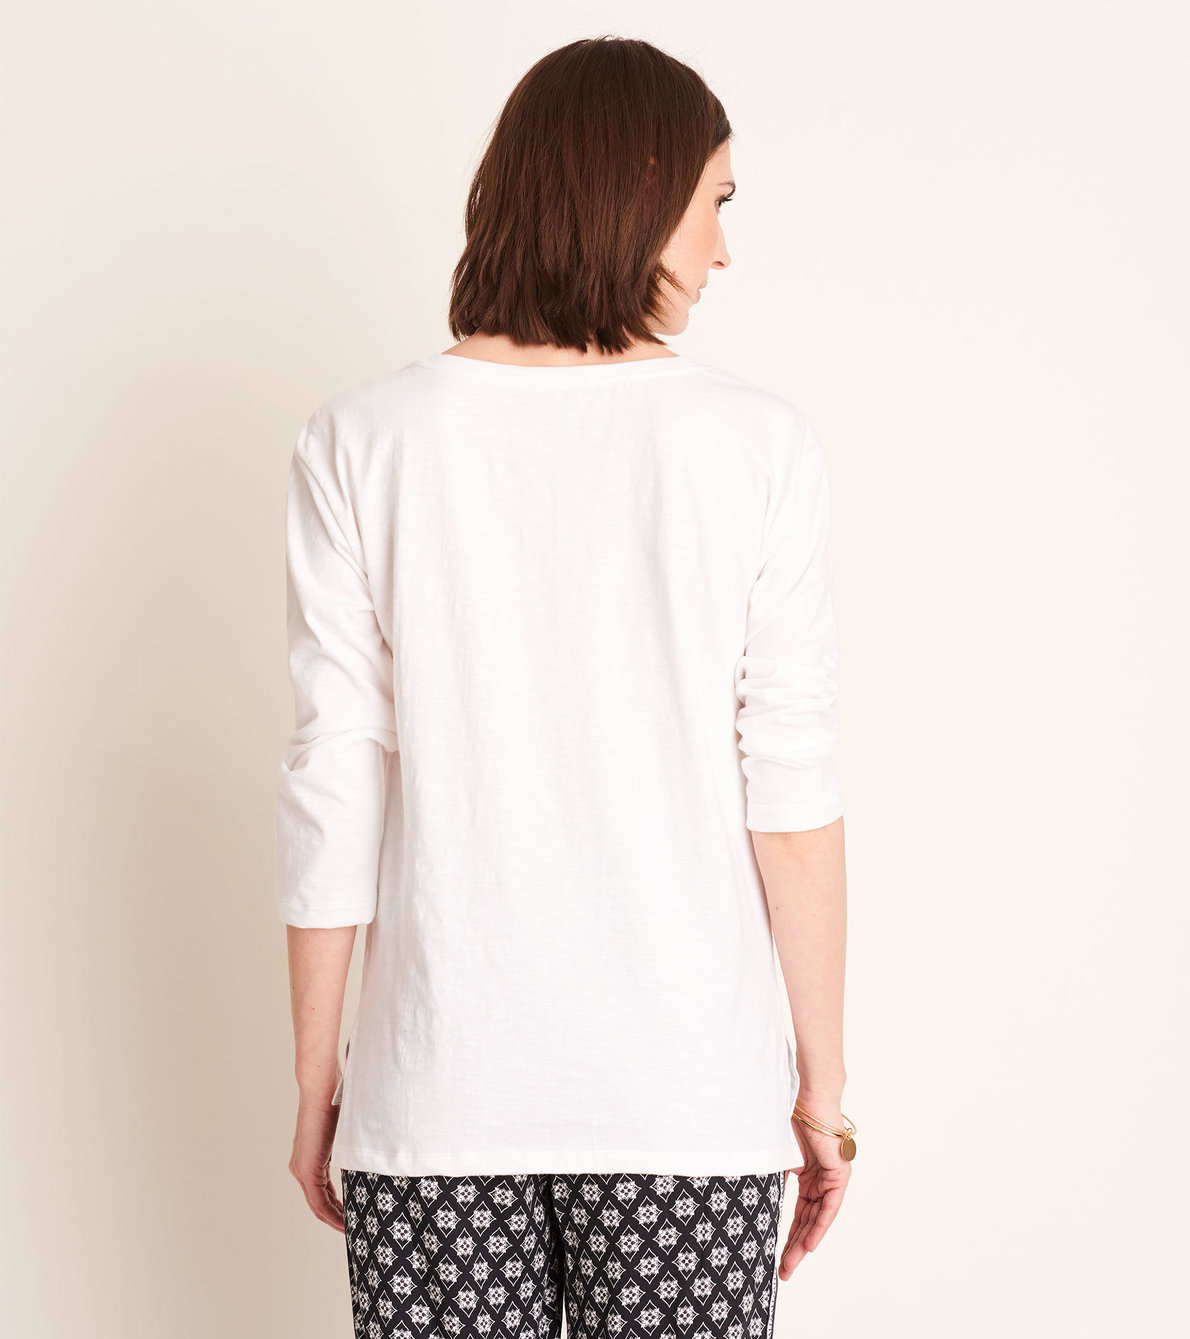 View larger image of Hatley 3/4 Sleeve Tee - White